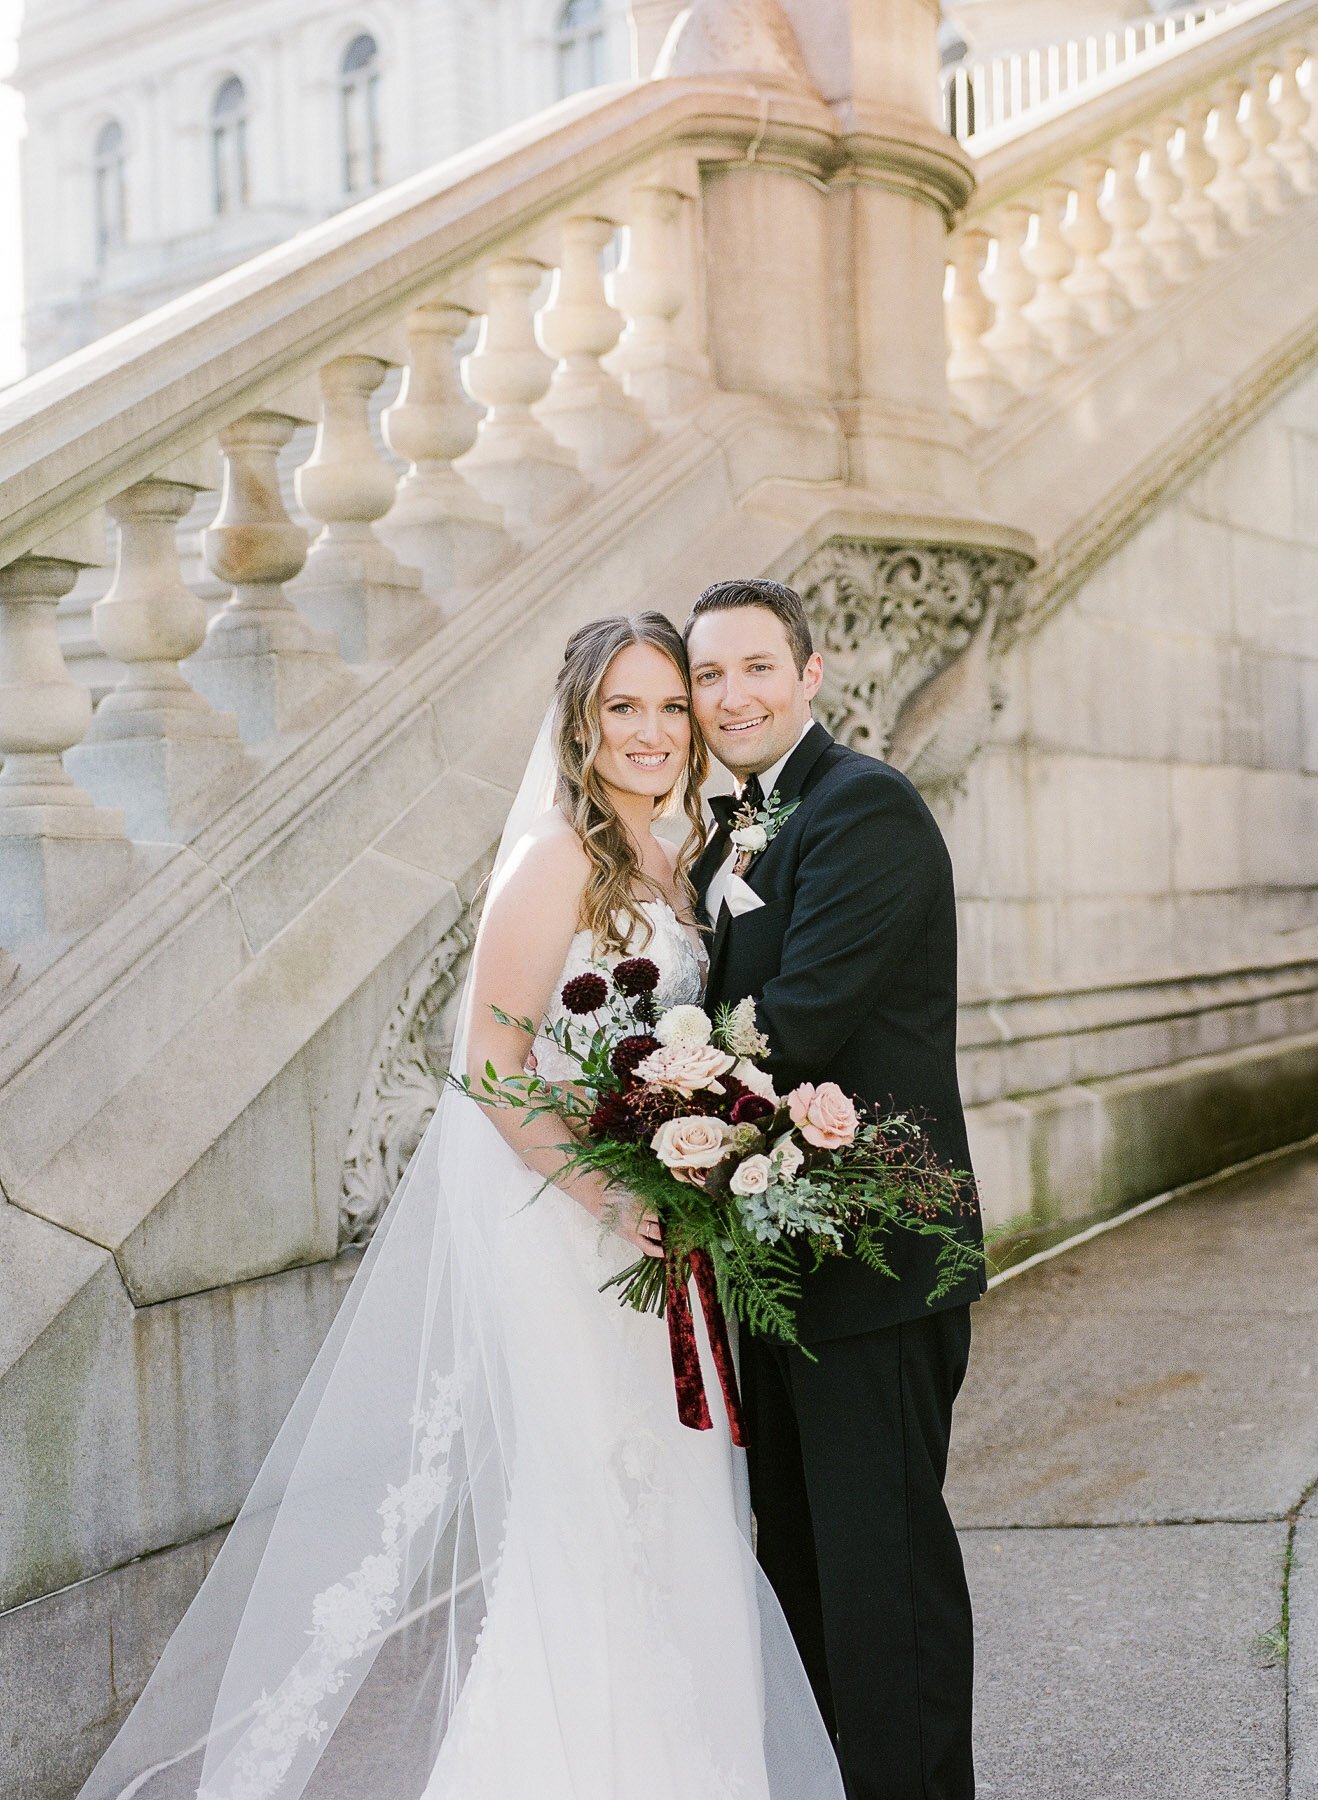 State Room Albany NY Wedding by Michelle Lange Photography-49.jpg